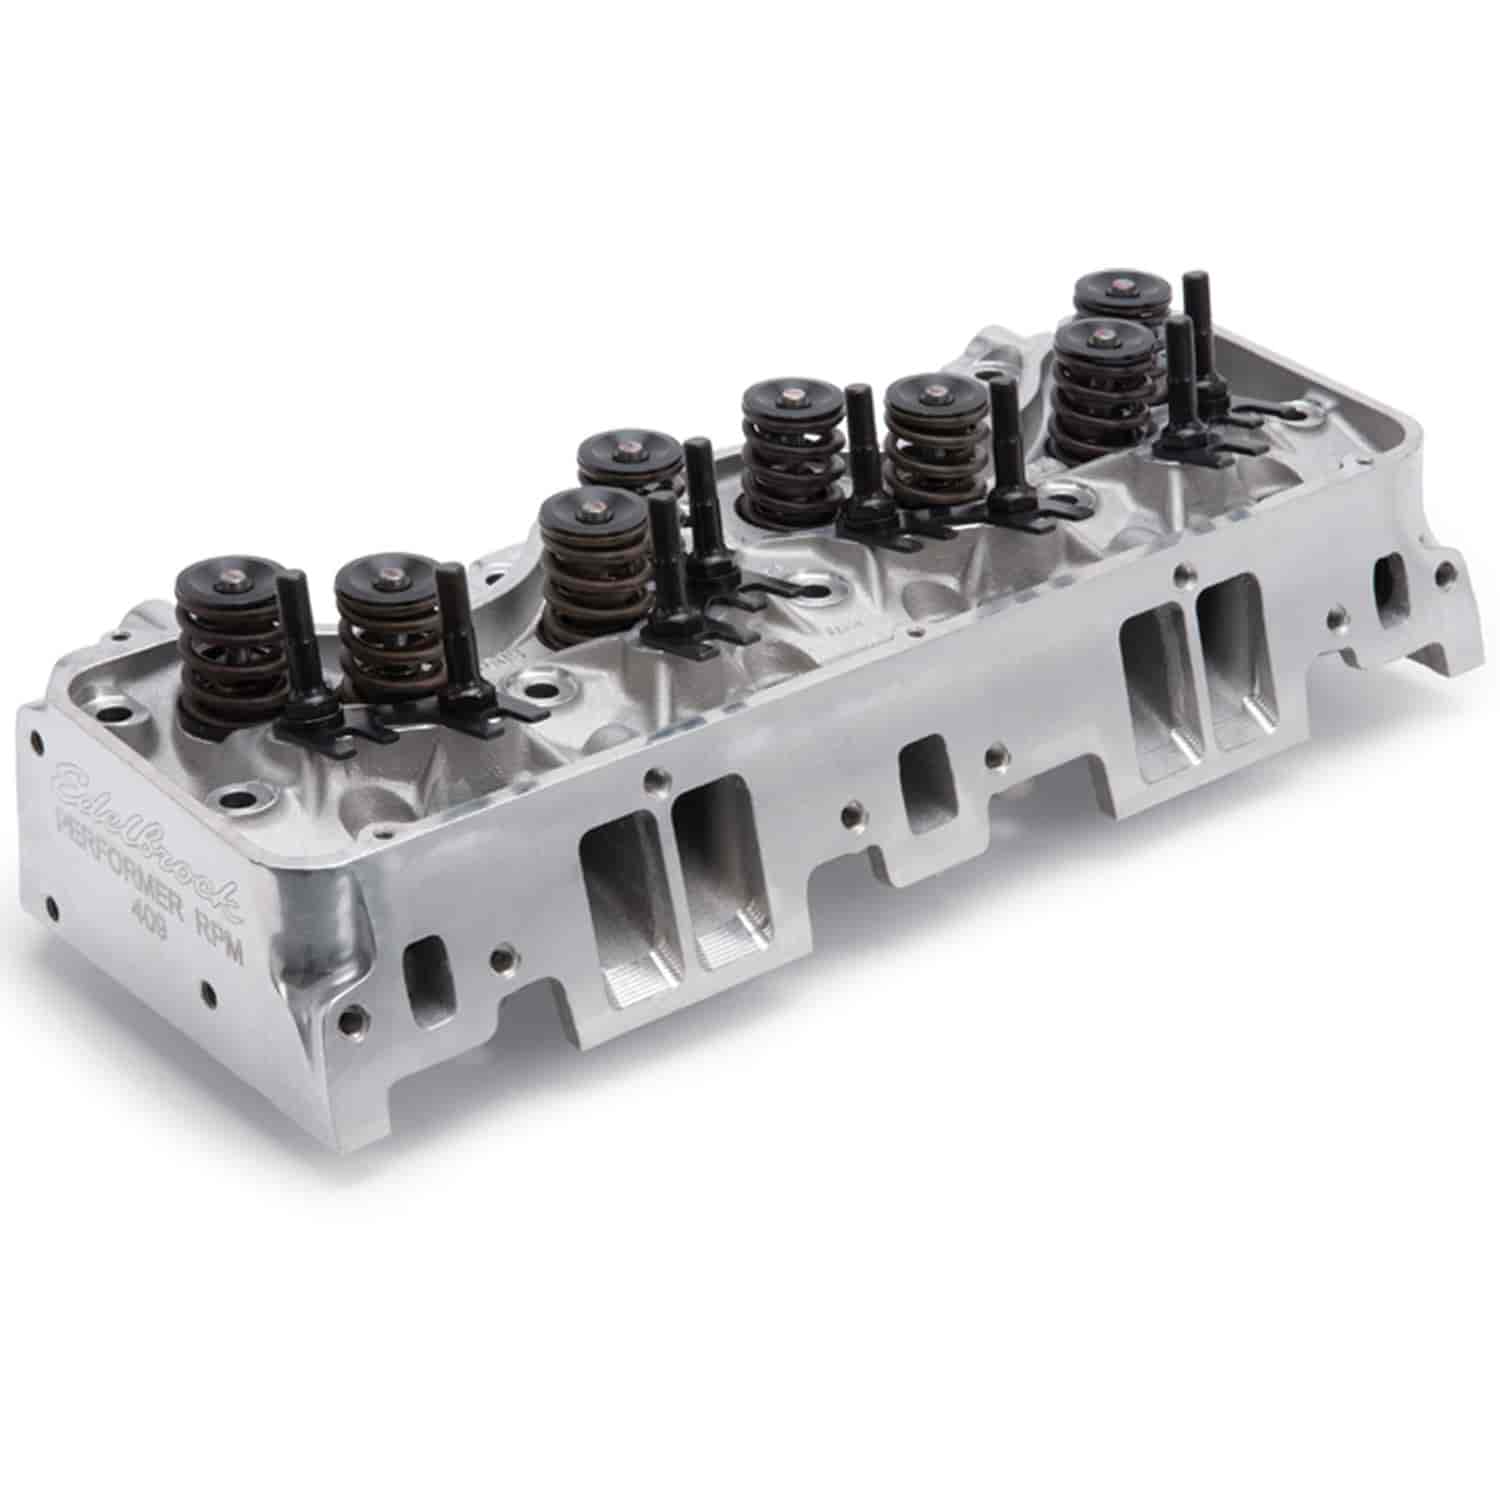 Performer RPM Chevy W-Series 348/409 Polished Cylinder Heads